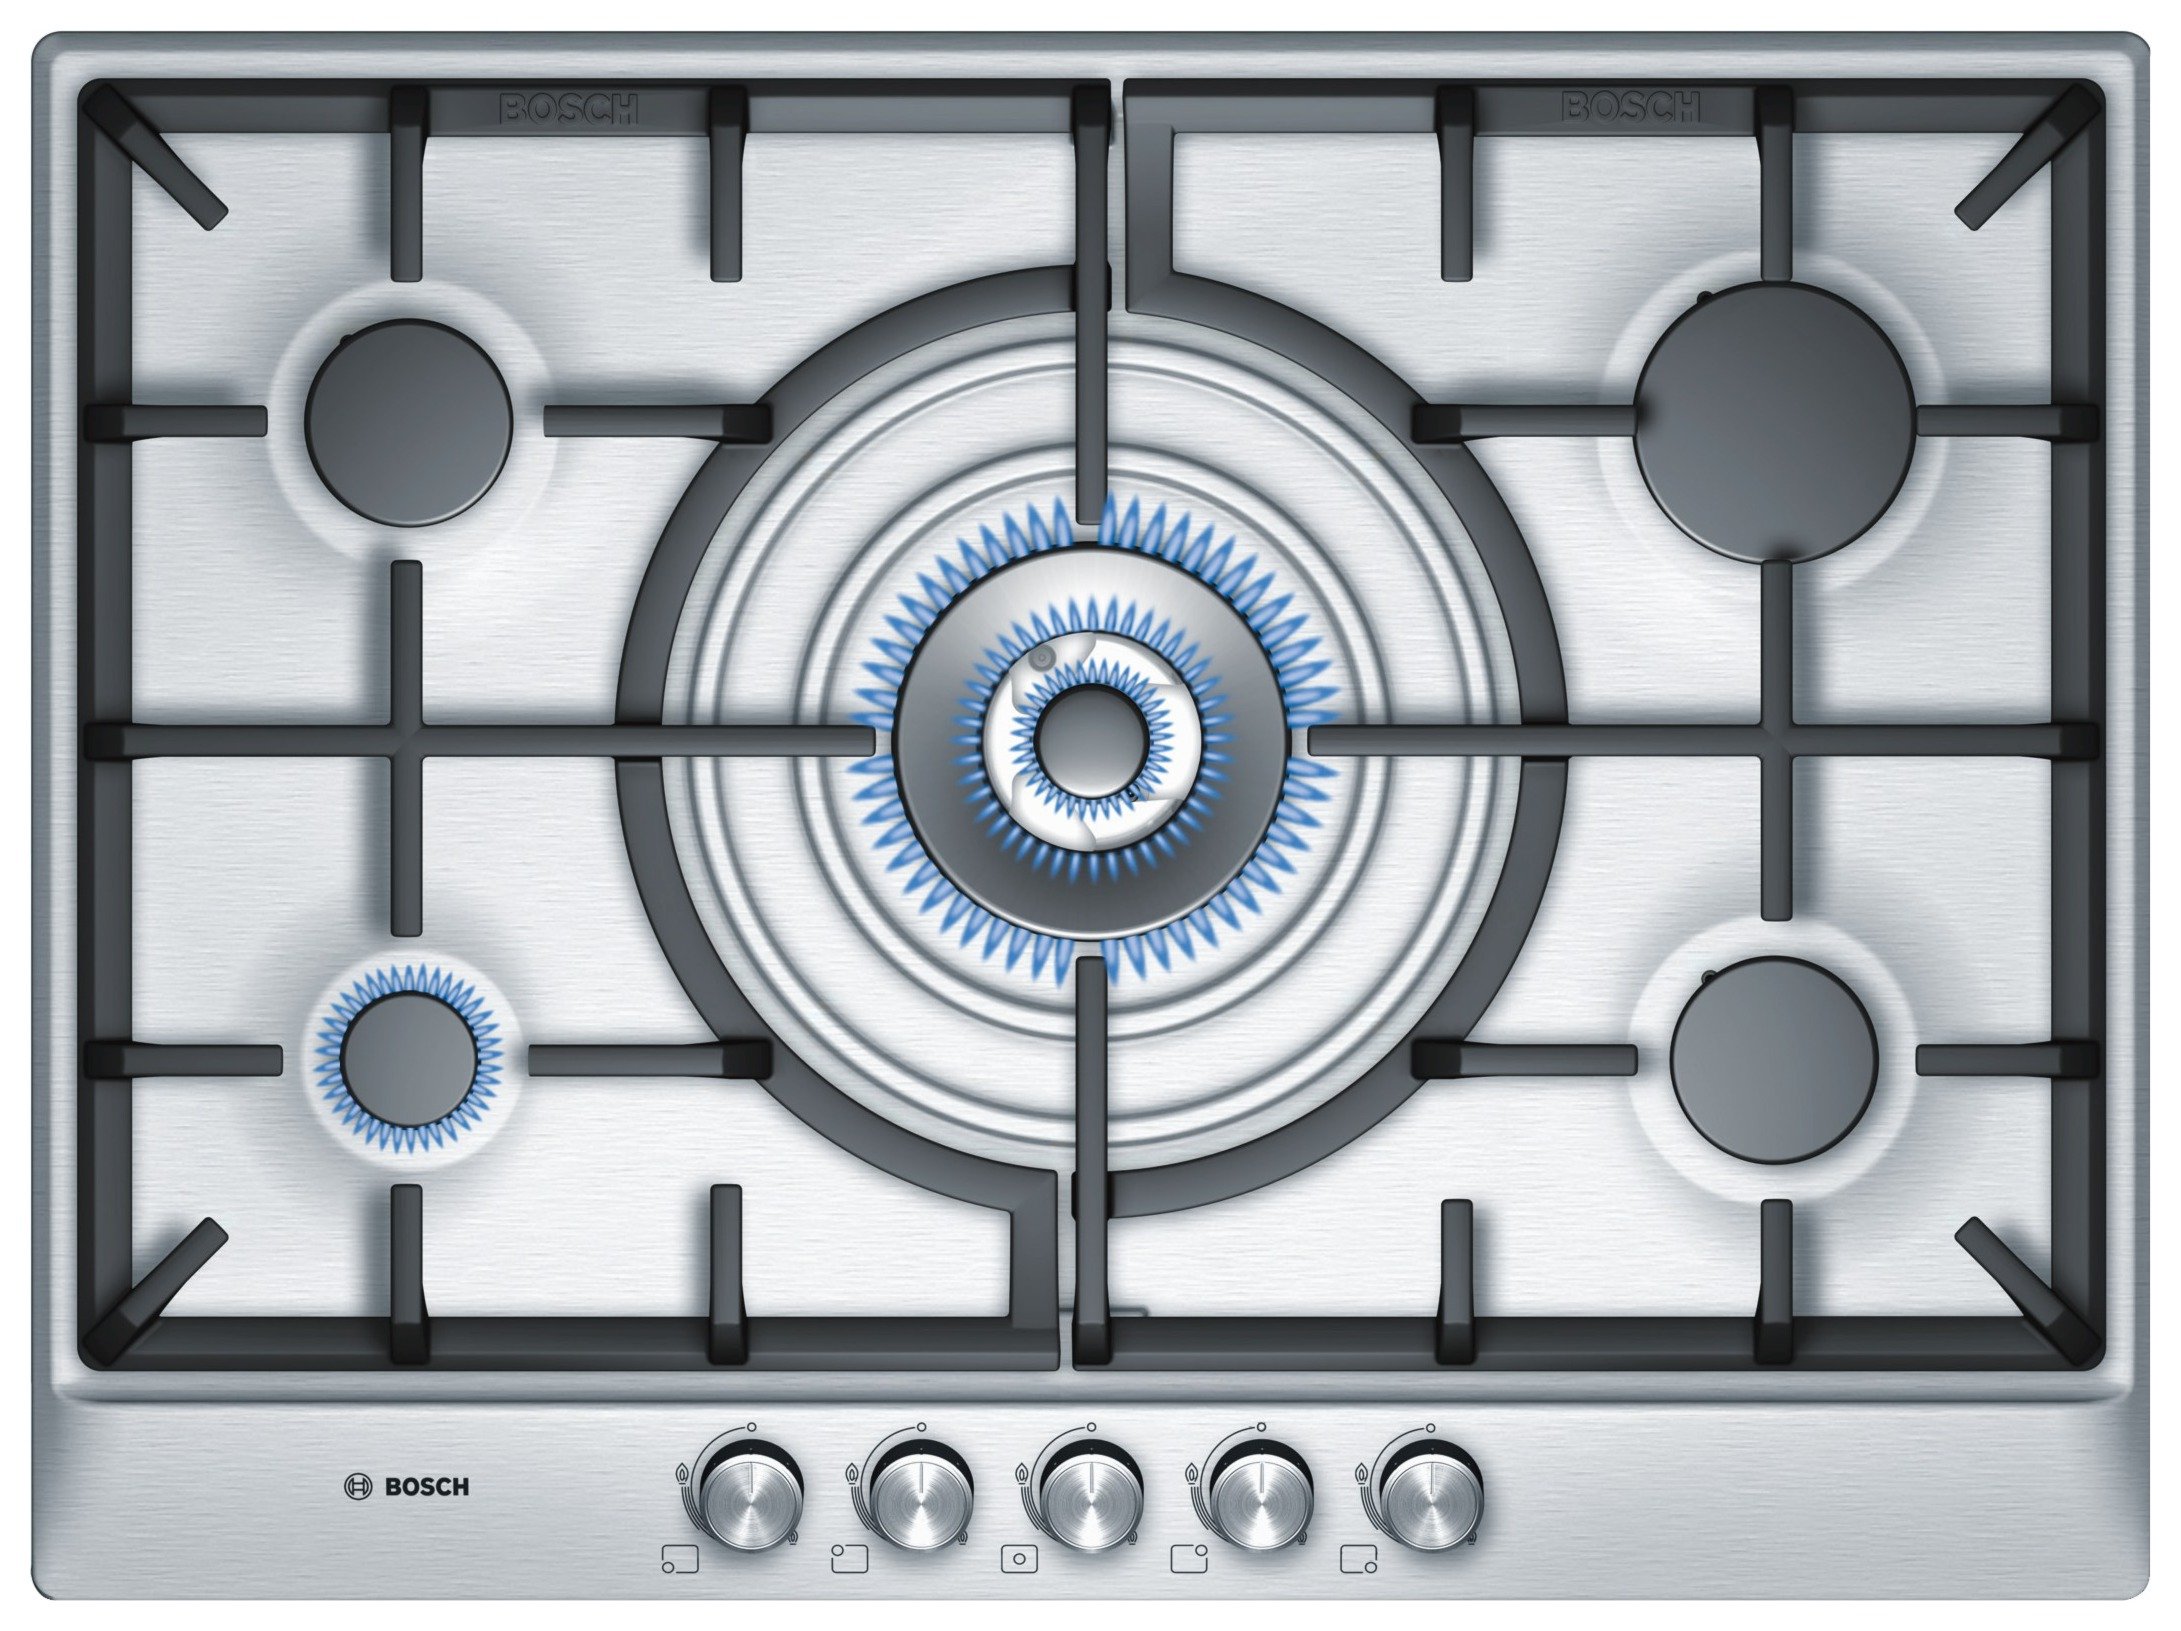 Bosch PCQ715B90E 70cm Gas Hob - Stainless Steel